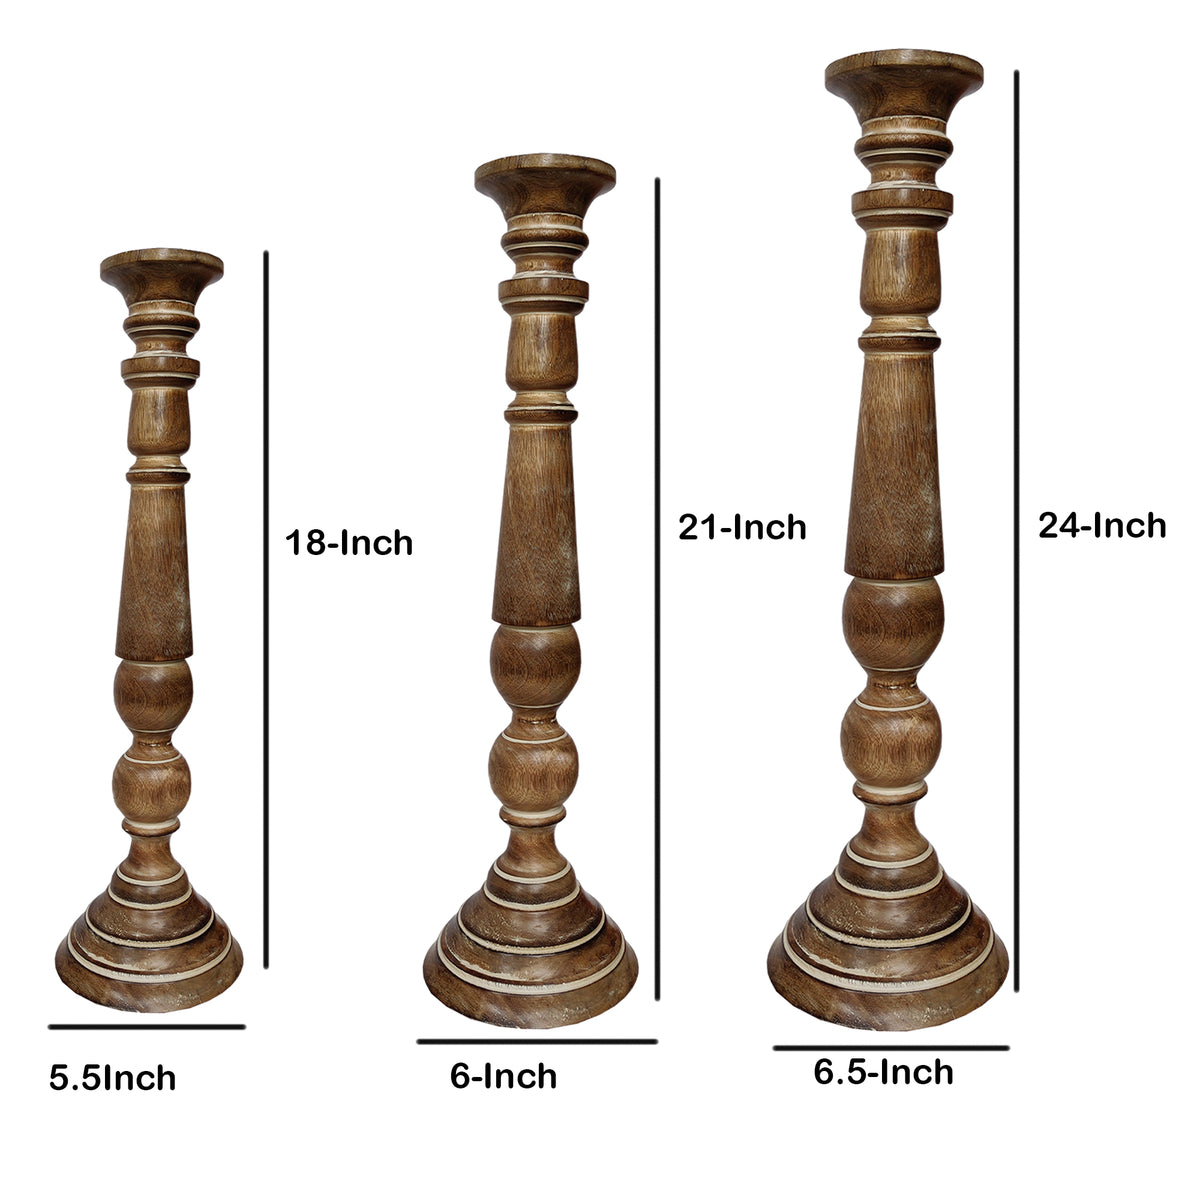 Handmade Wooden Candle Holder with Flared Top, Natural Brown, Set of 3 - BM00081